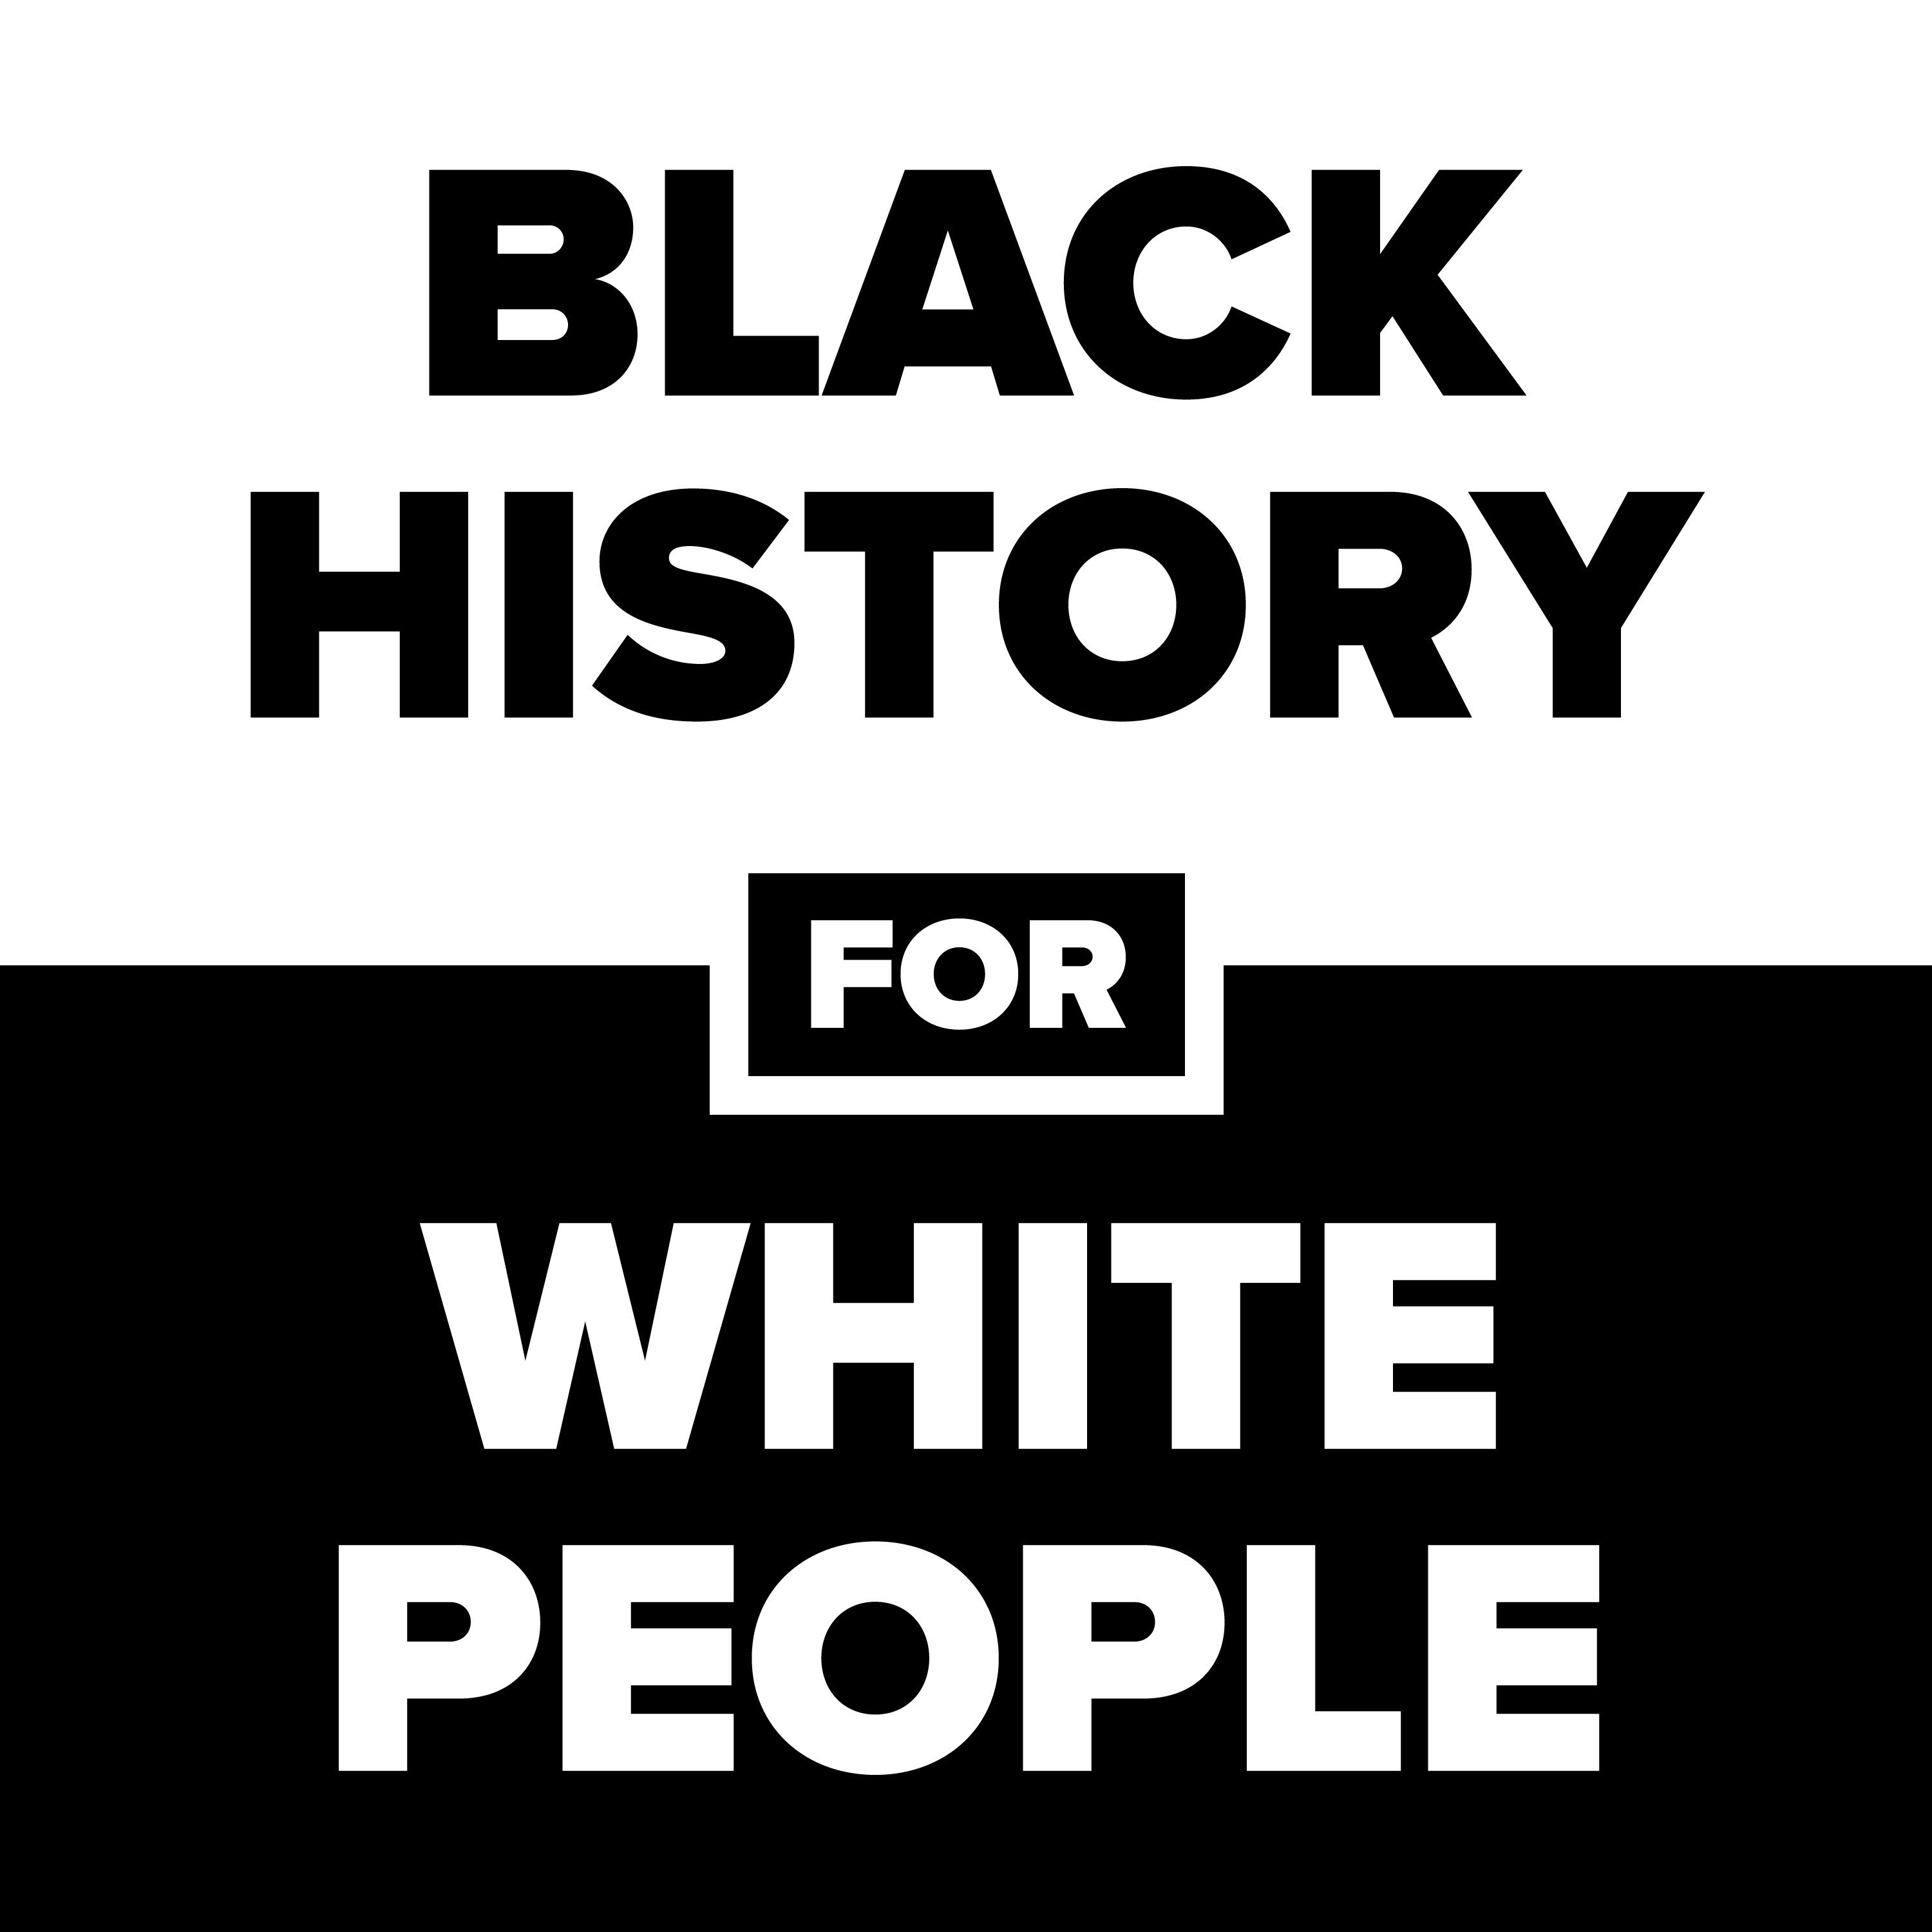 Black History for White People